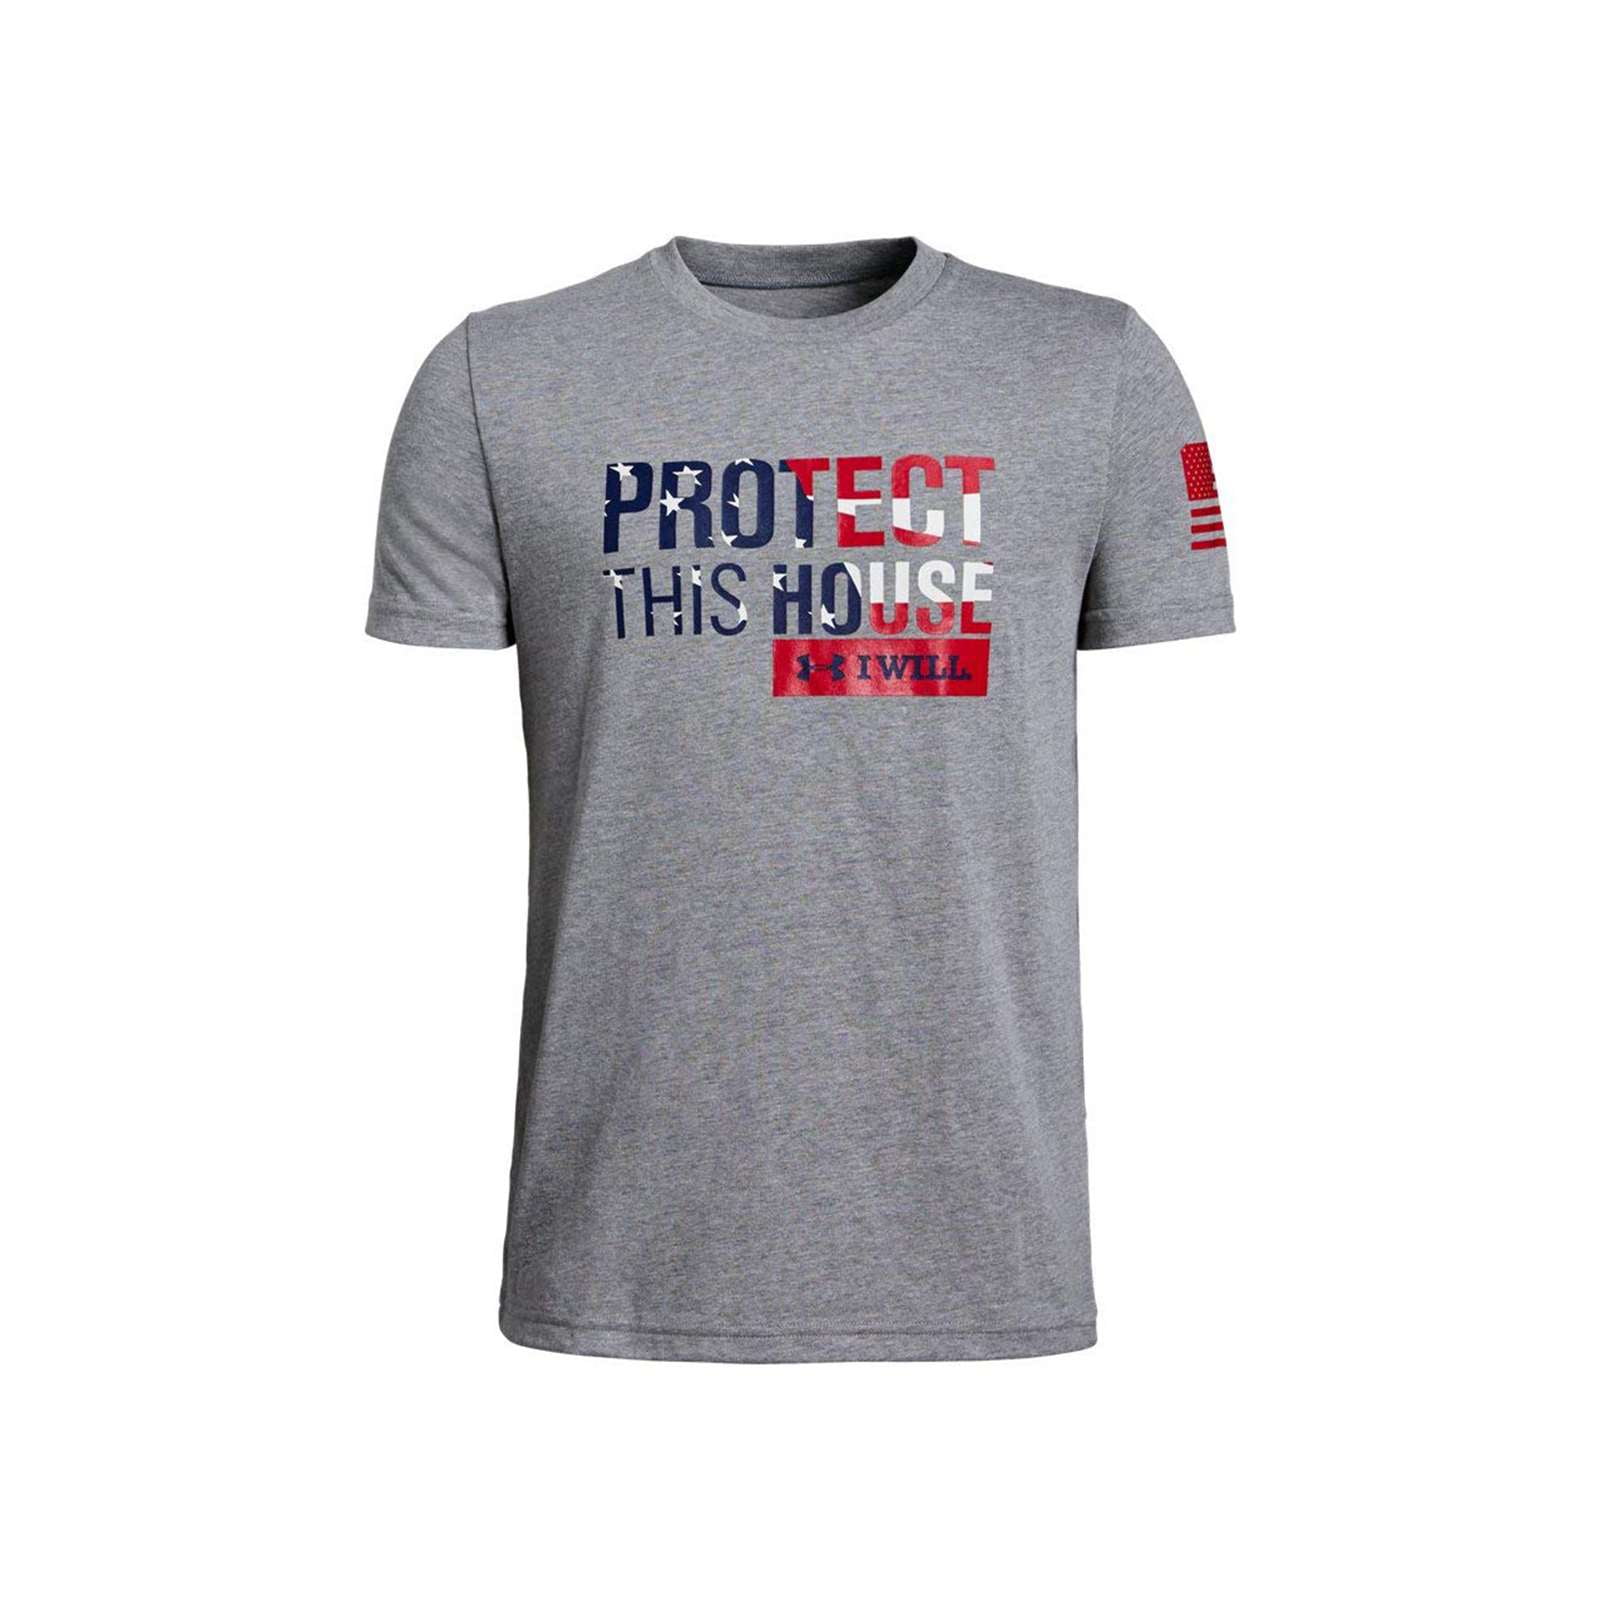 Under Armour Boys Freedom "Protect This House" Short Sleeve Crew Neck T-Shirt